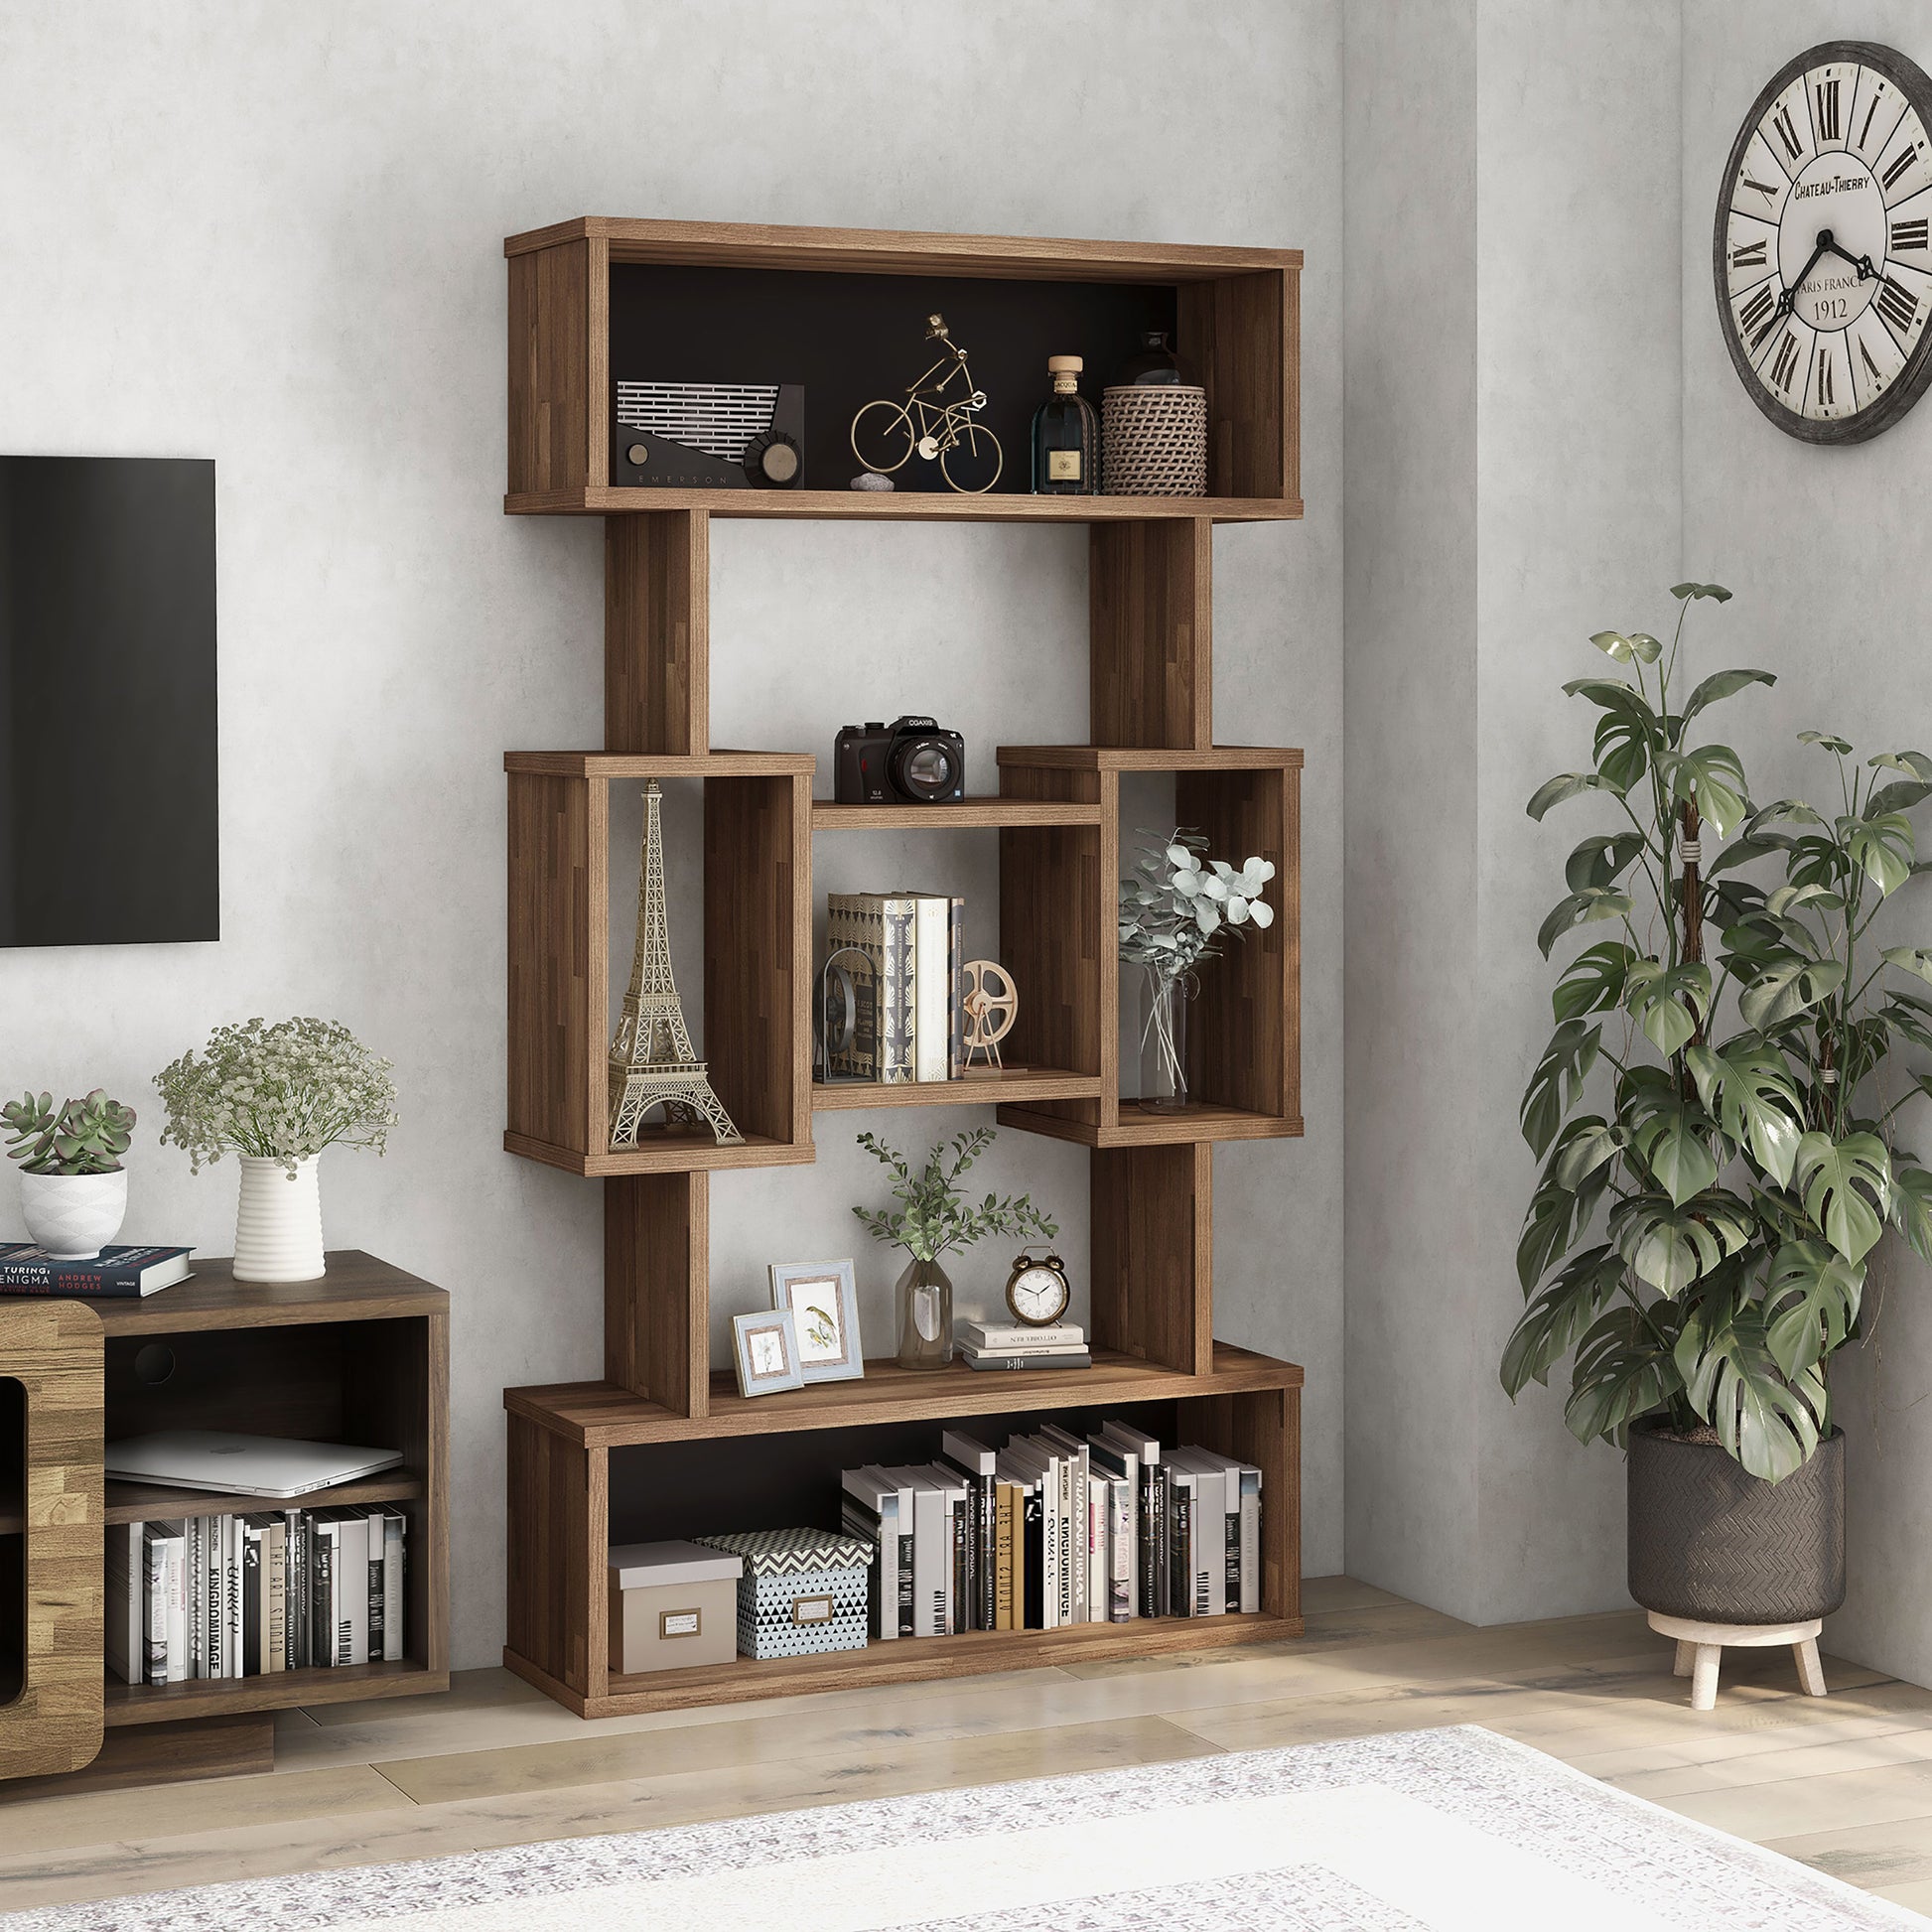 Right angled modern light hickory open cubic bookcase display shelf in a living room with accessories